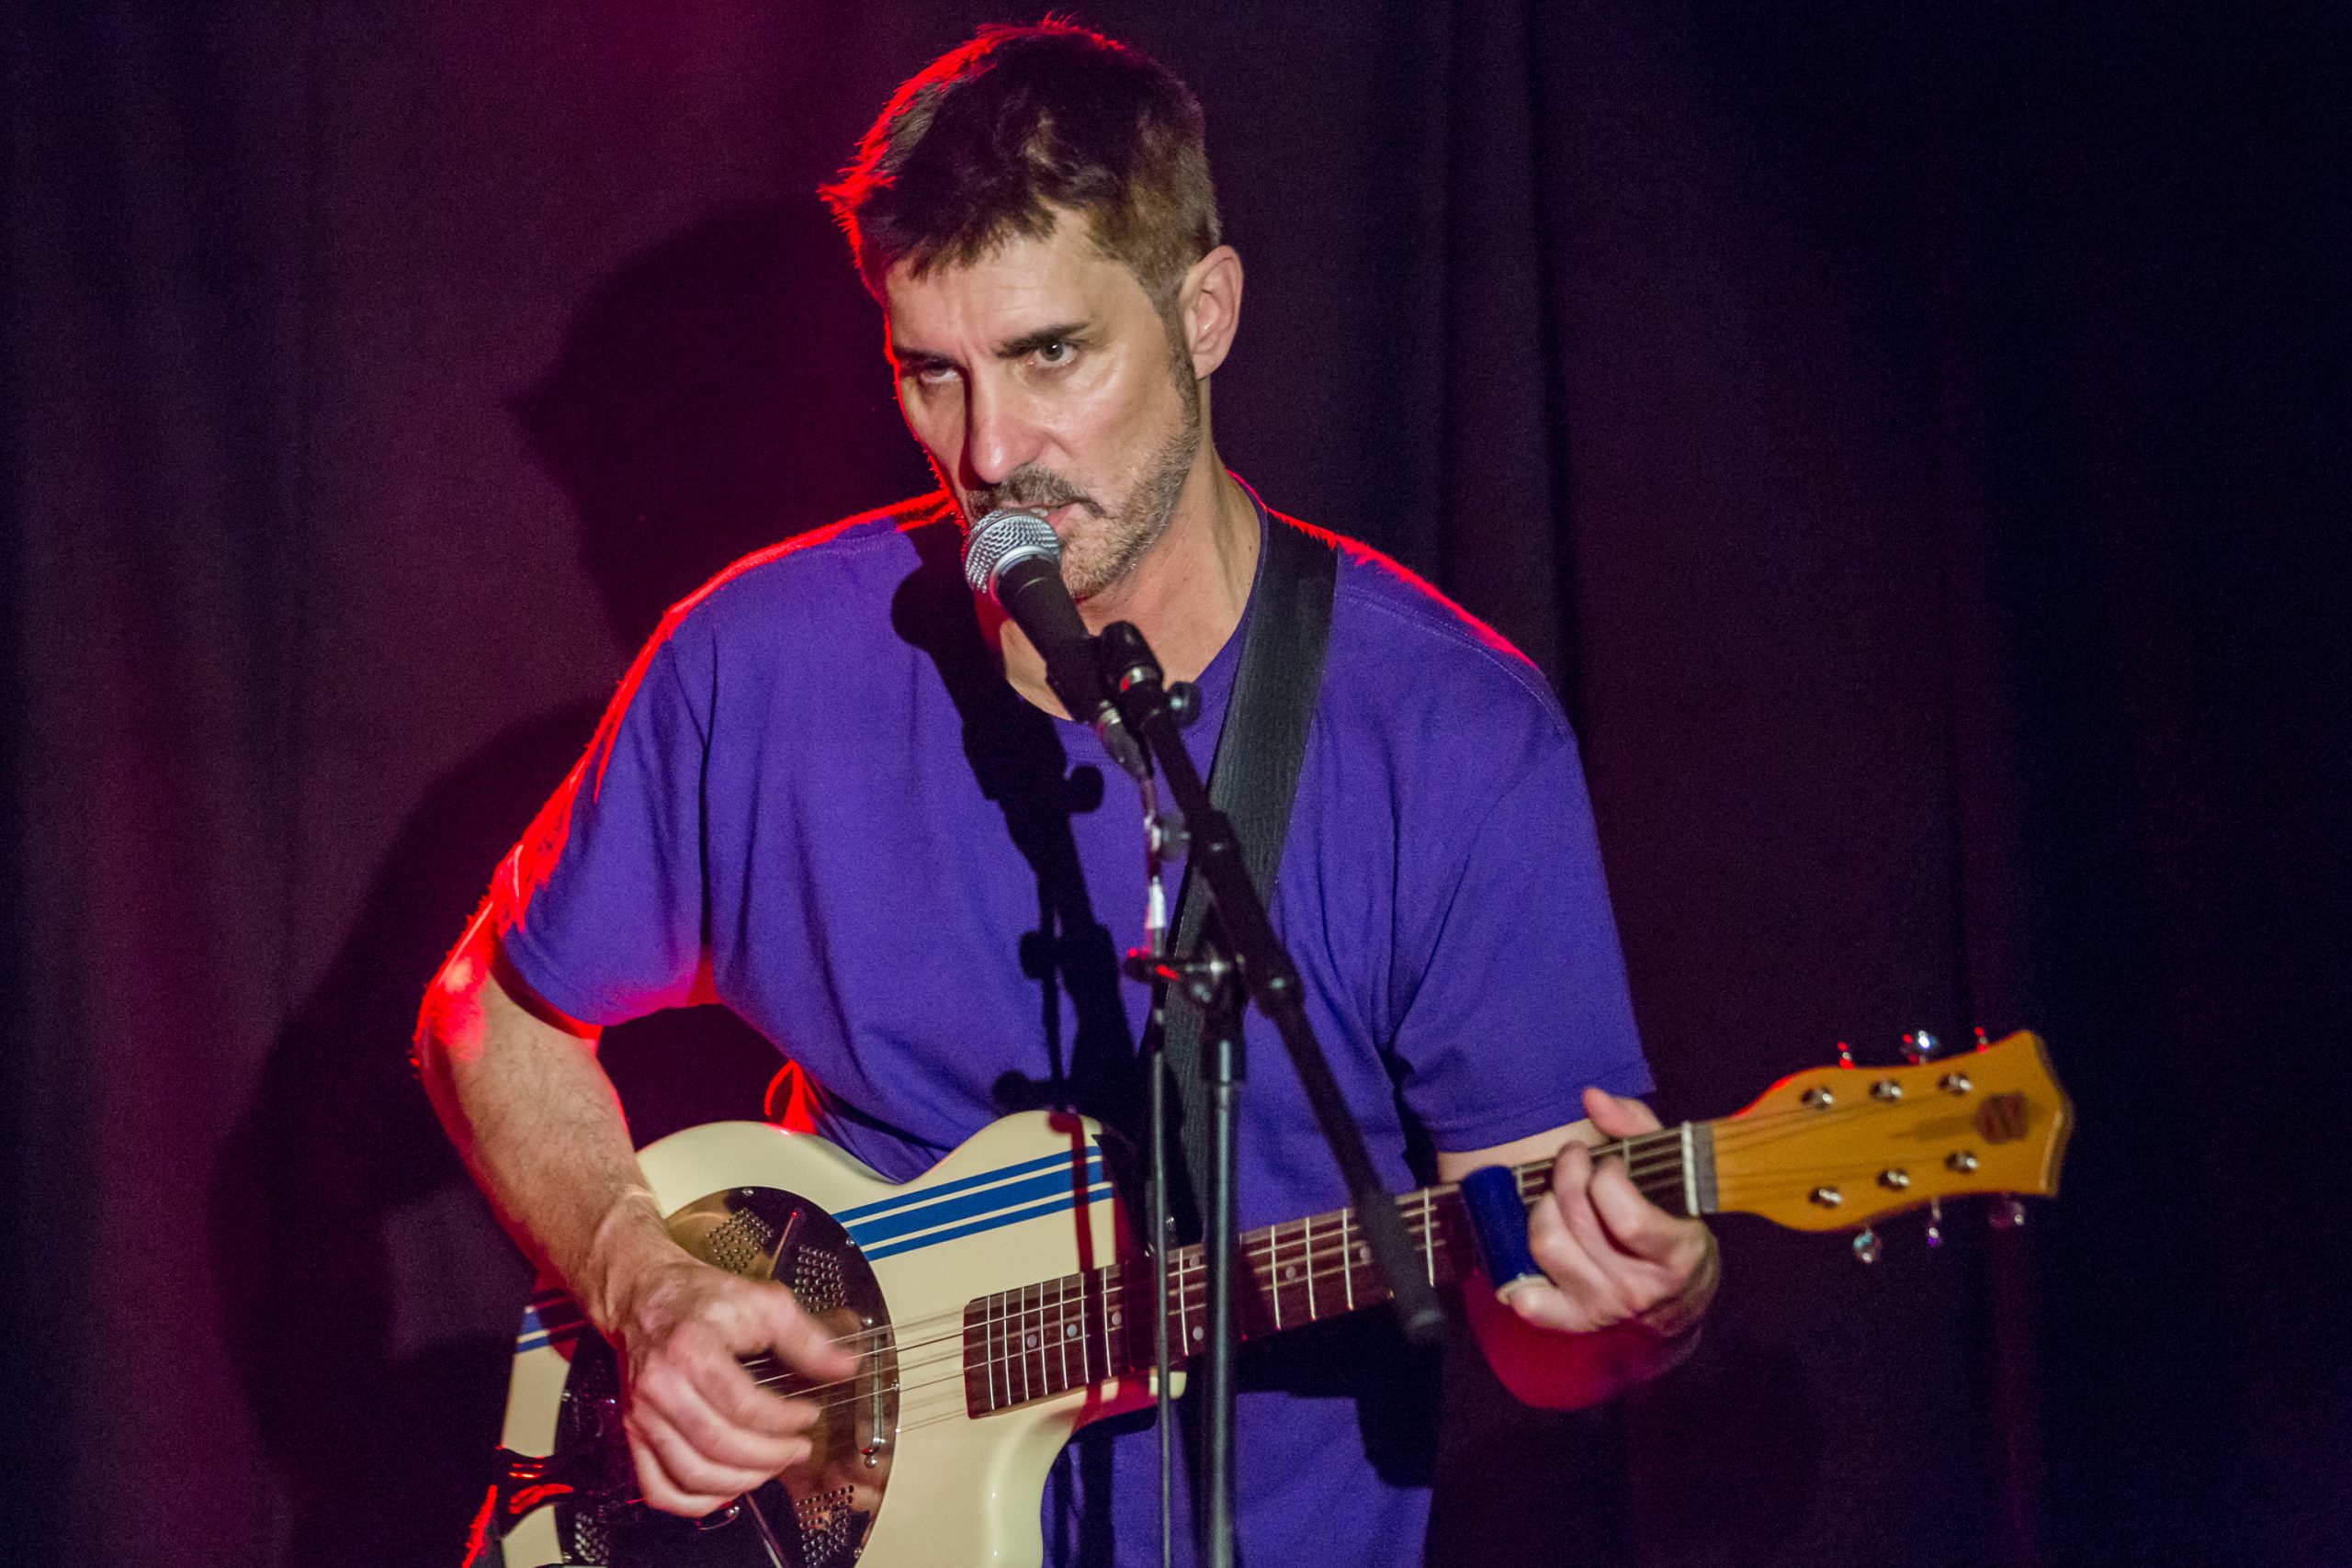 Dean Temple in Voice of Authority at Edinburgh Fringe 2019, photo by Chris Scott